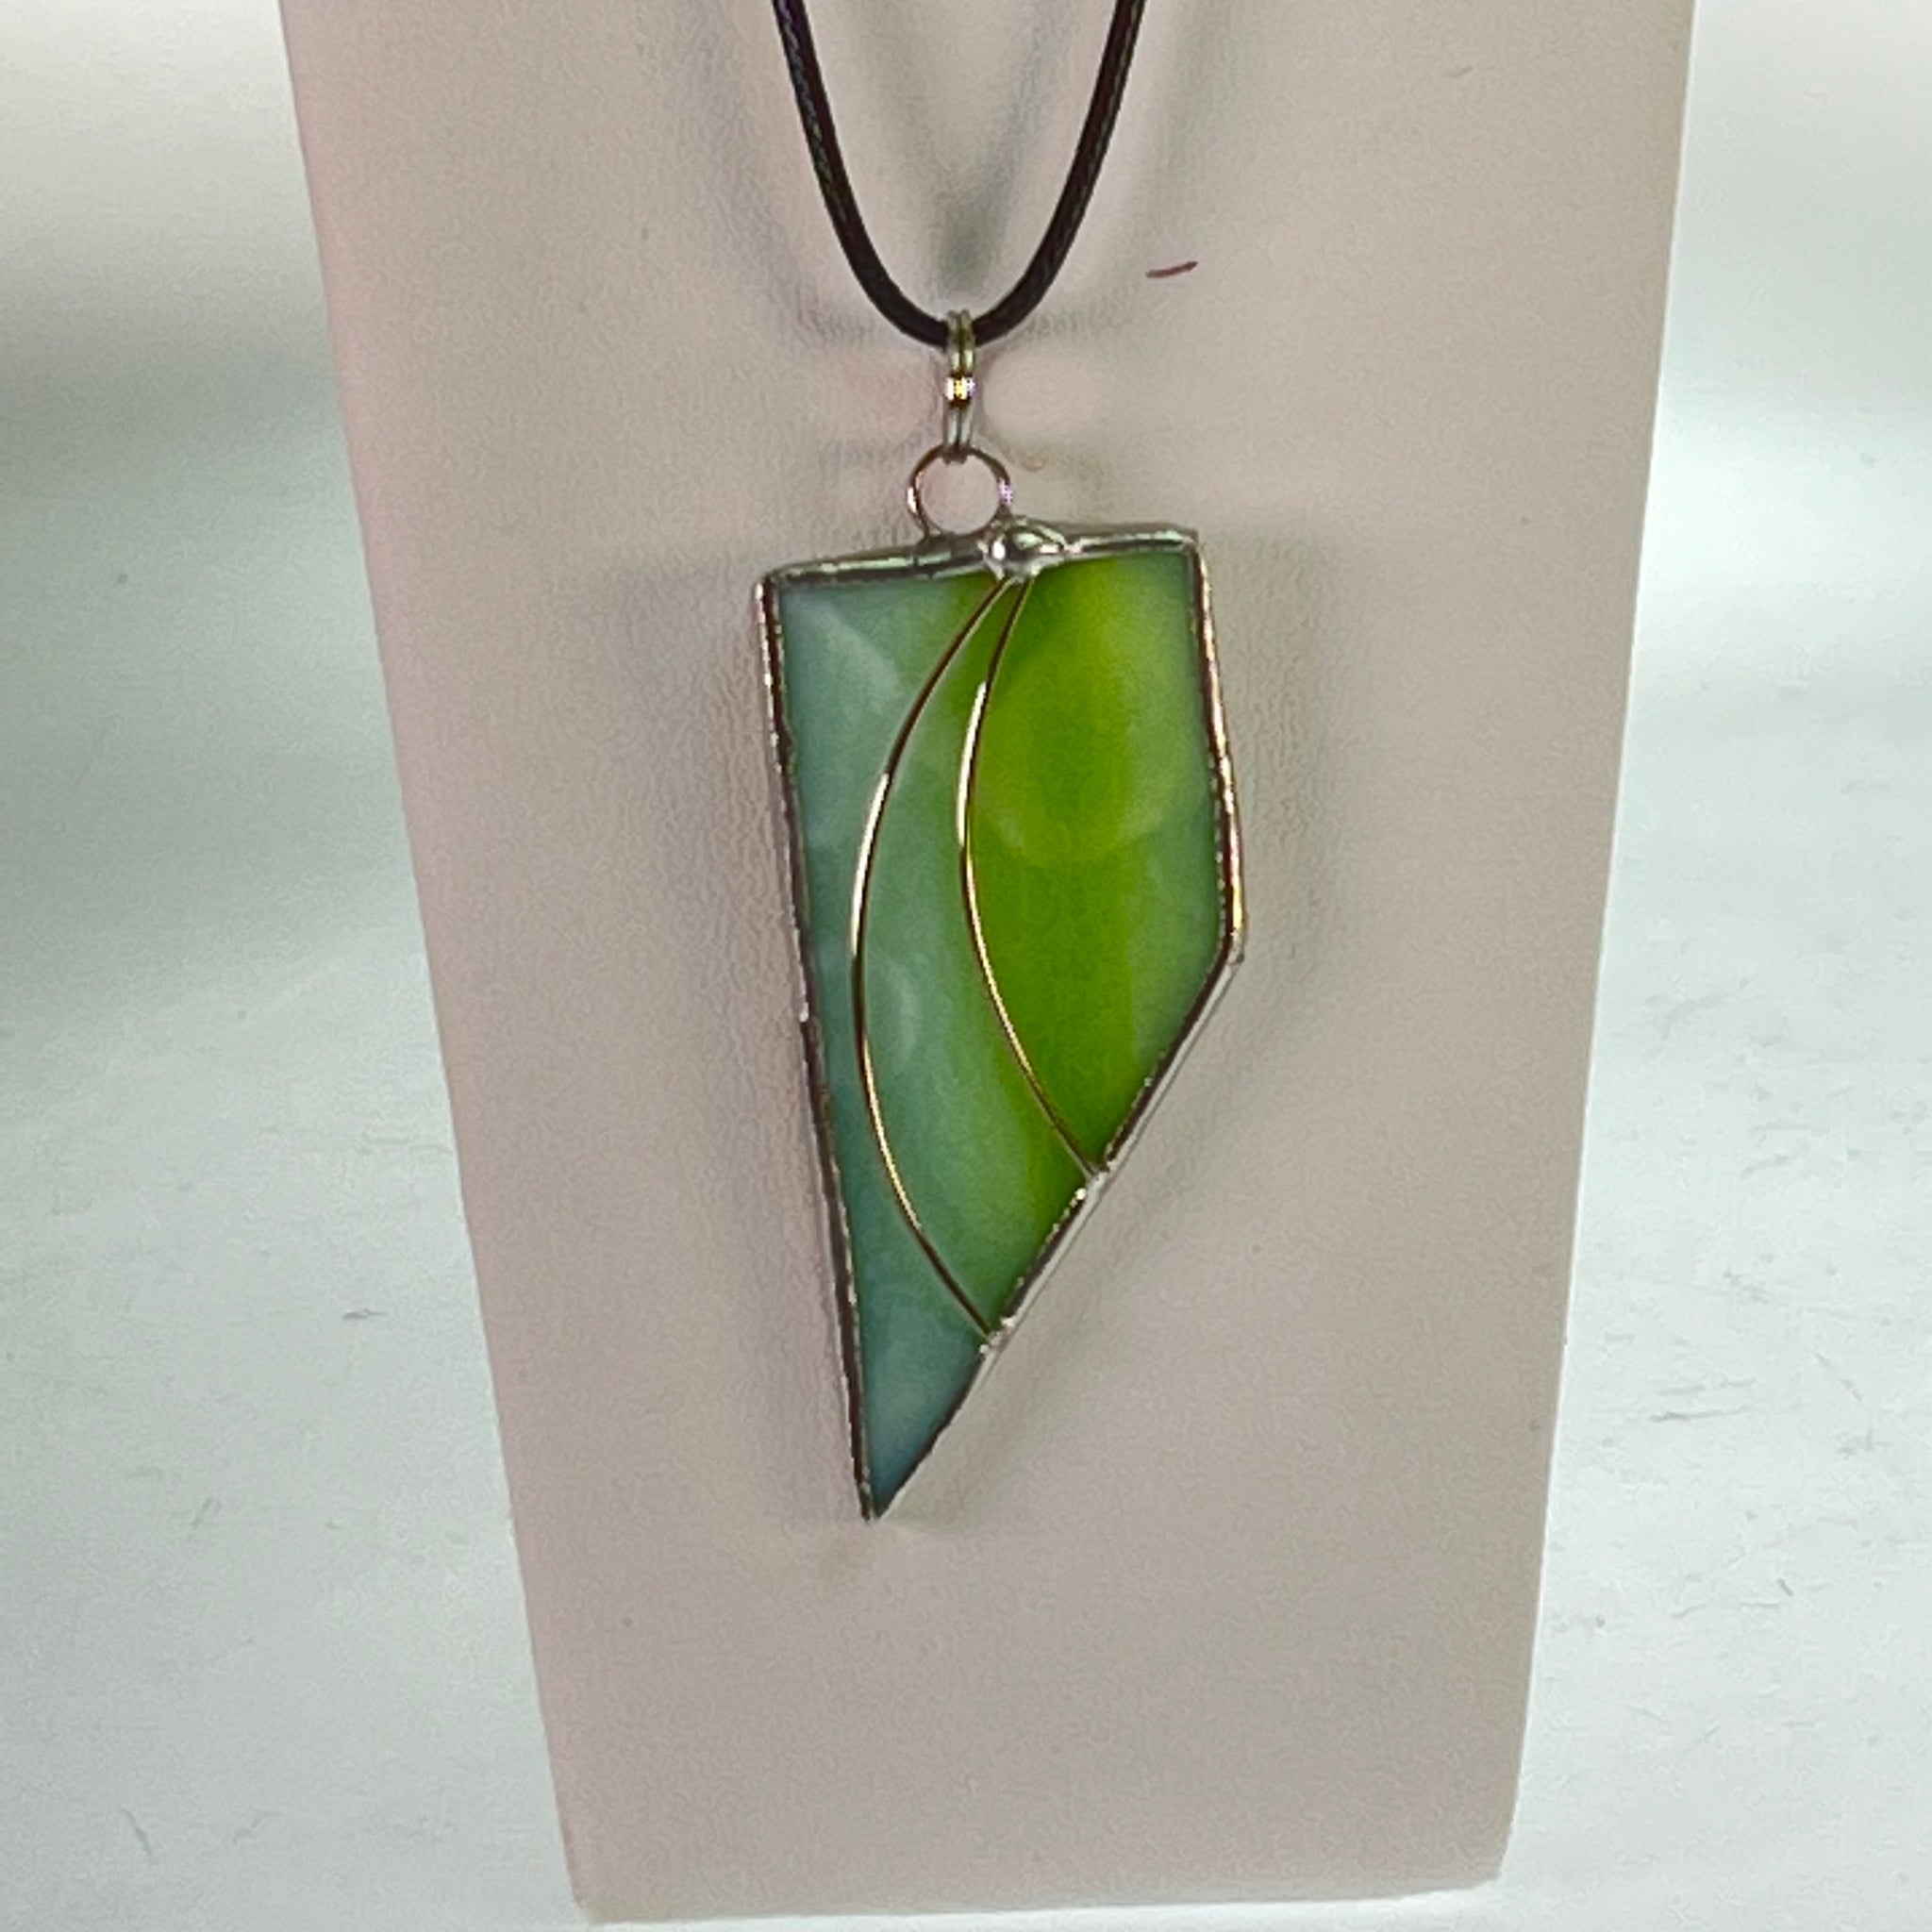 Dove Necklace FAUX Stained Glass Art Print Holy Spirit PEACE Silver Pendant  | eBay